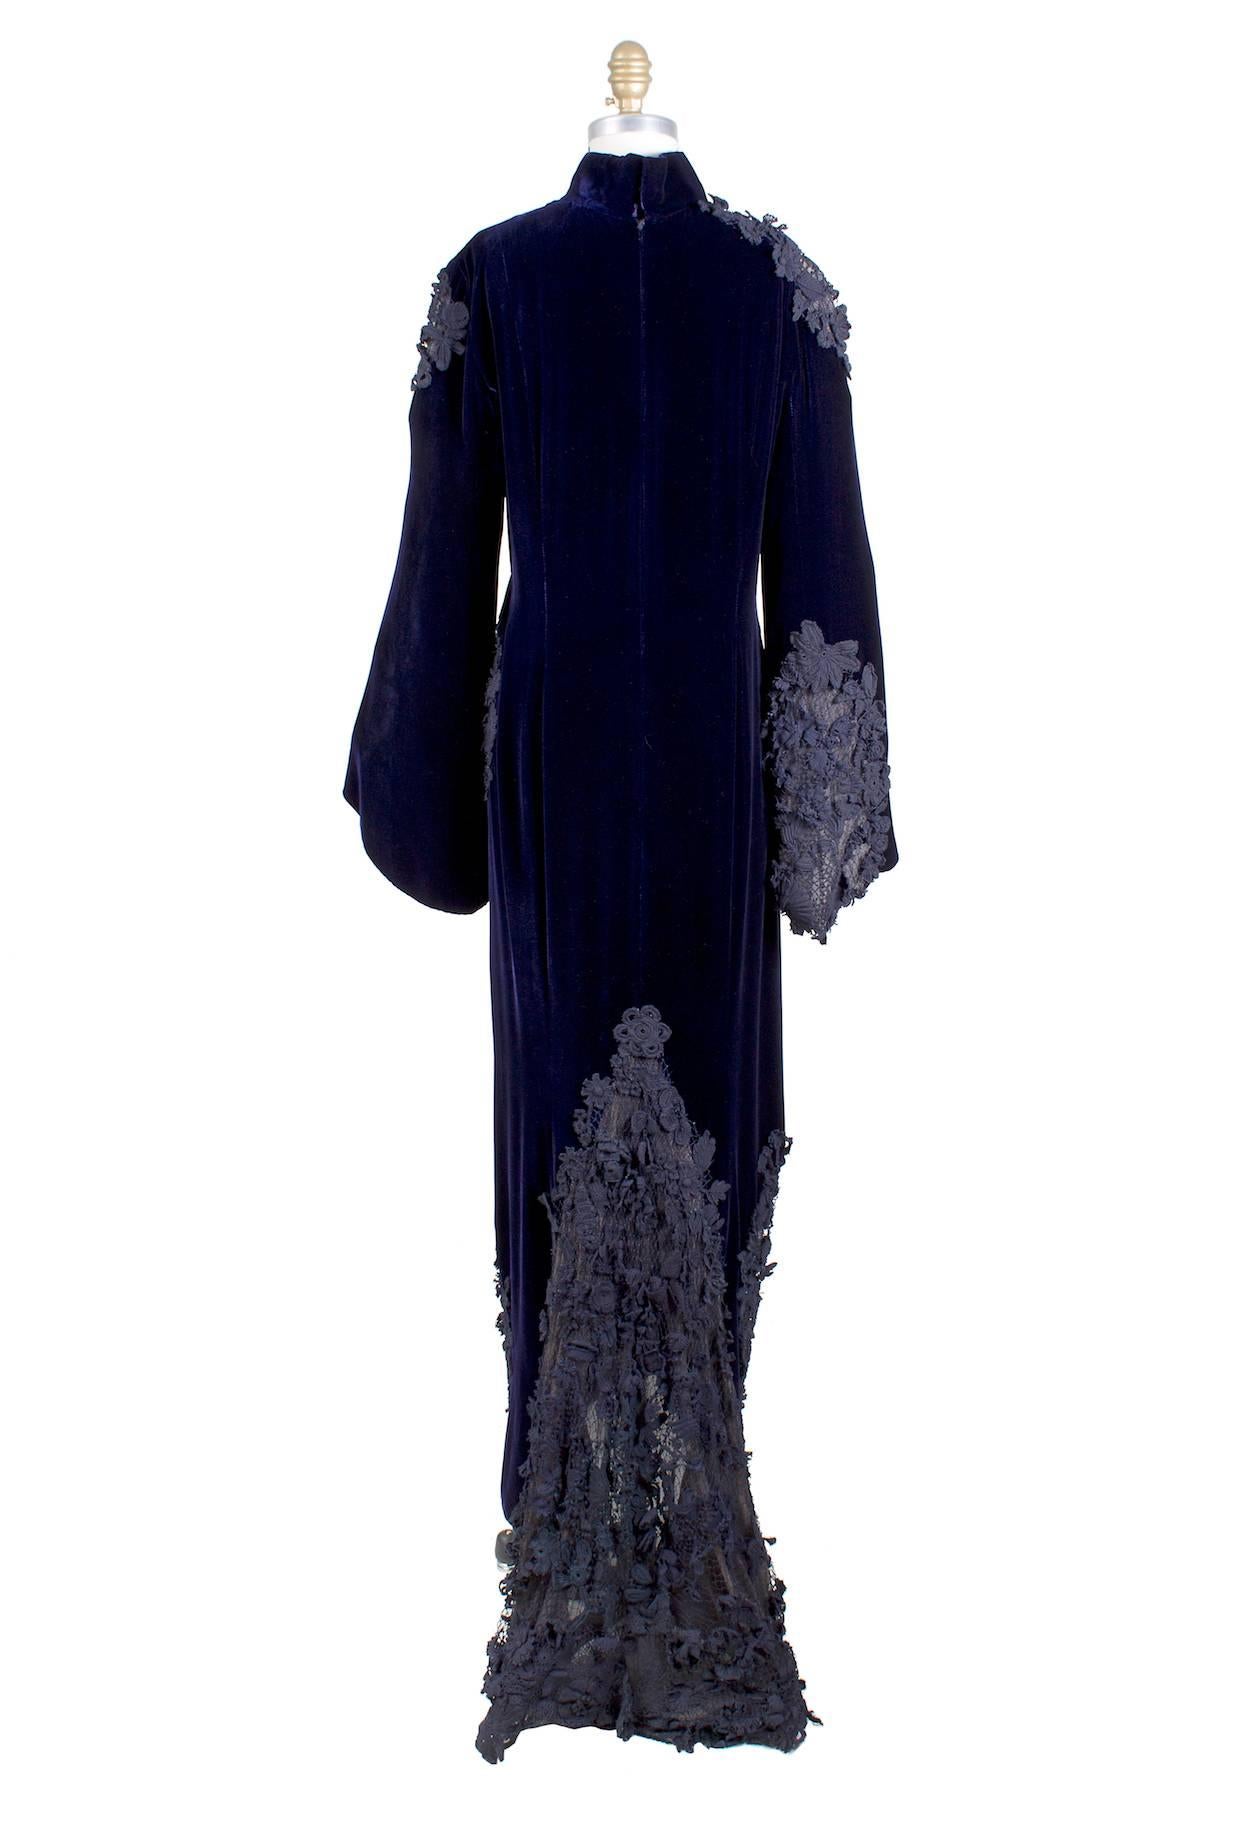 This is a couture dress by Jean Paul Gaultier c. 1990s.  It is made from midnight purple velvet and features black appliqués.  It has bell shaped sleeves and a dark purple chiffon lining.  The closure is a zipper in back with top snap and hook and